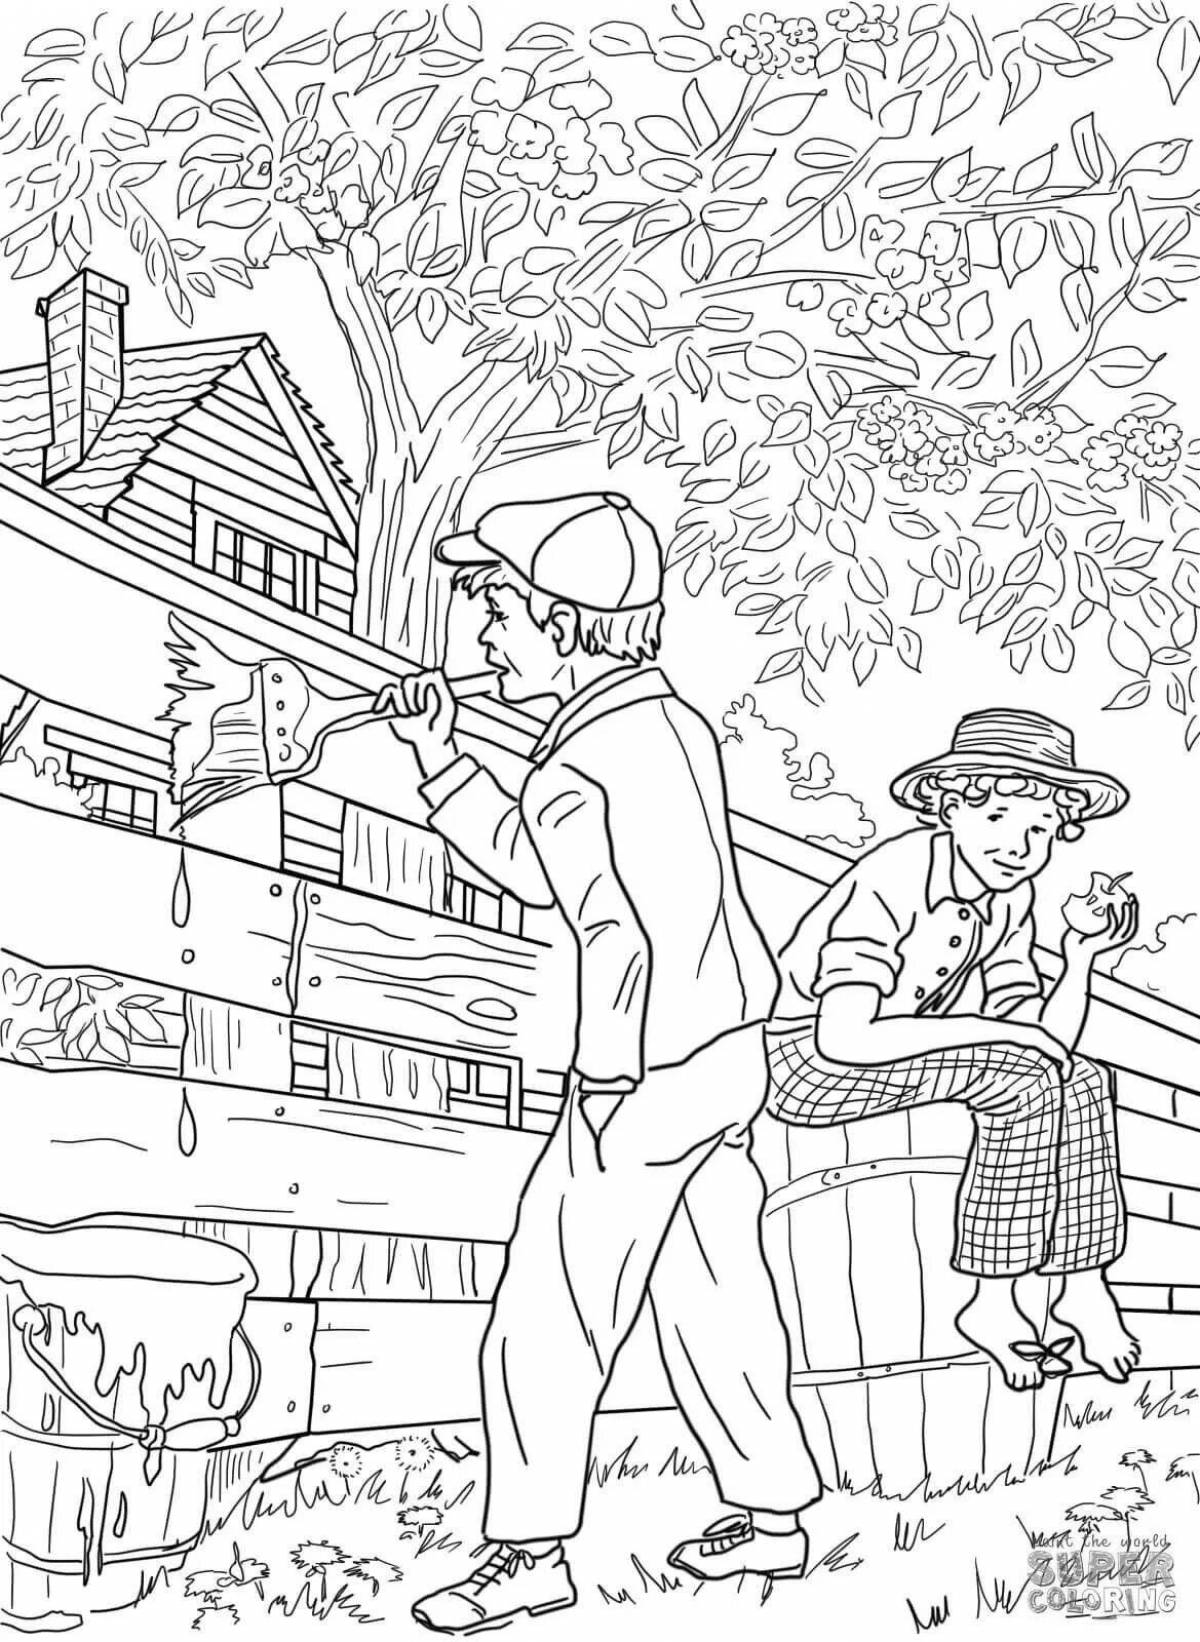 Photo Tom sawyer's incredible coloring book